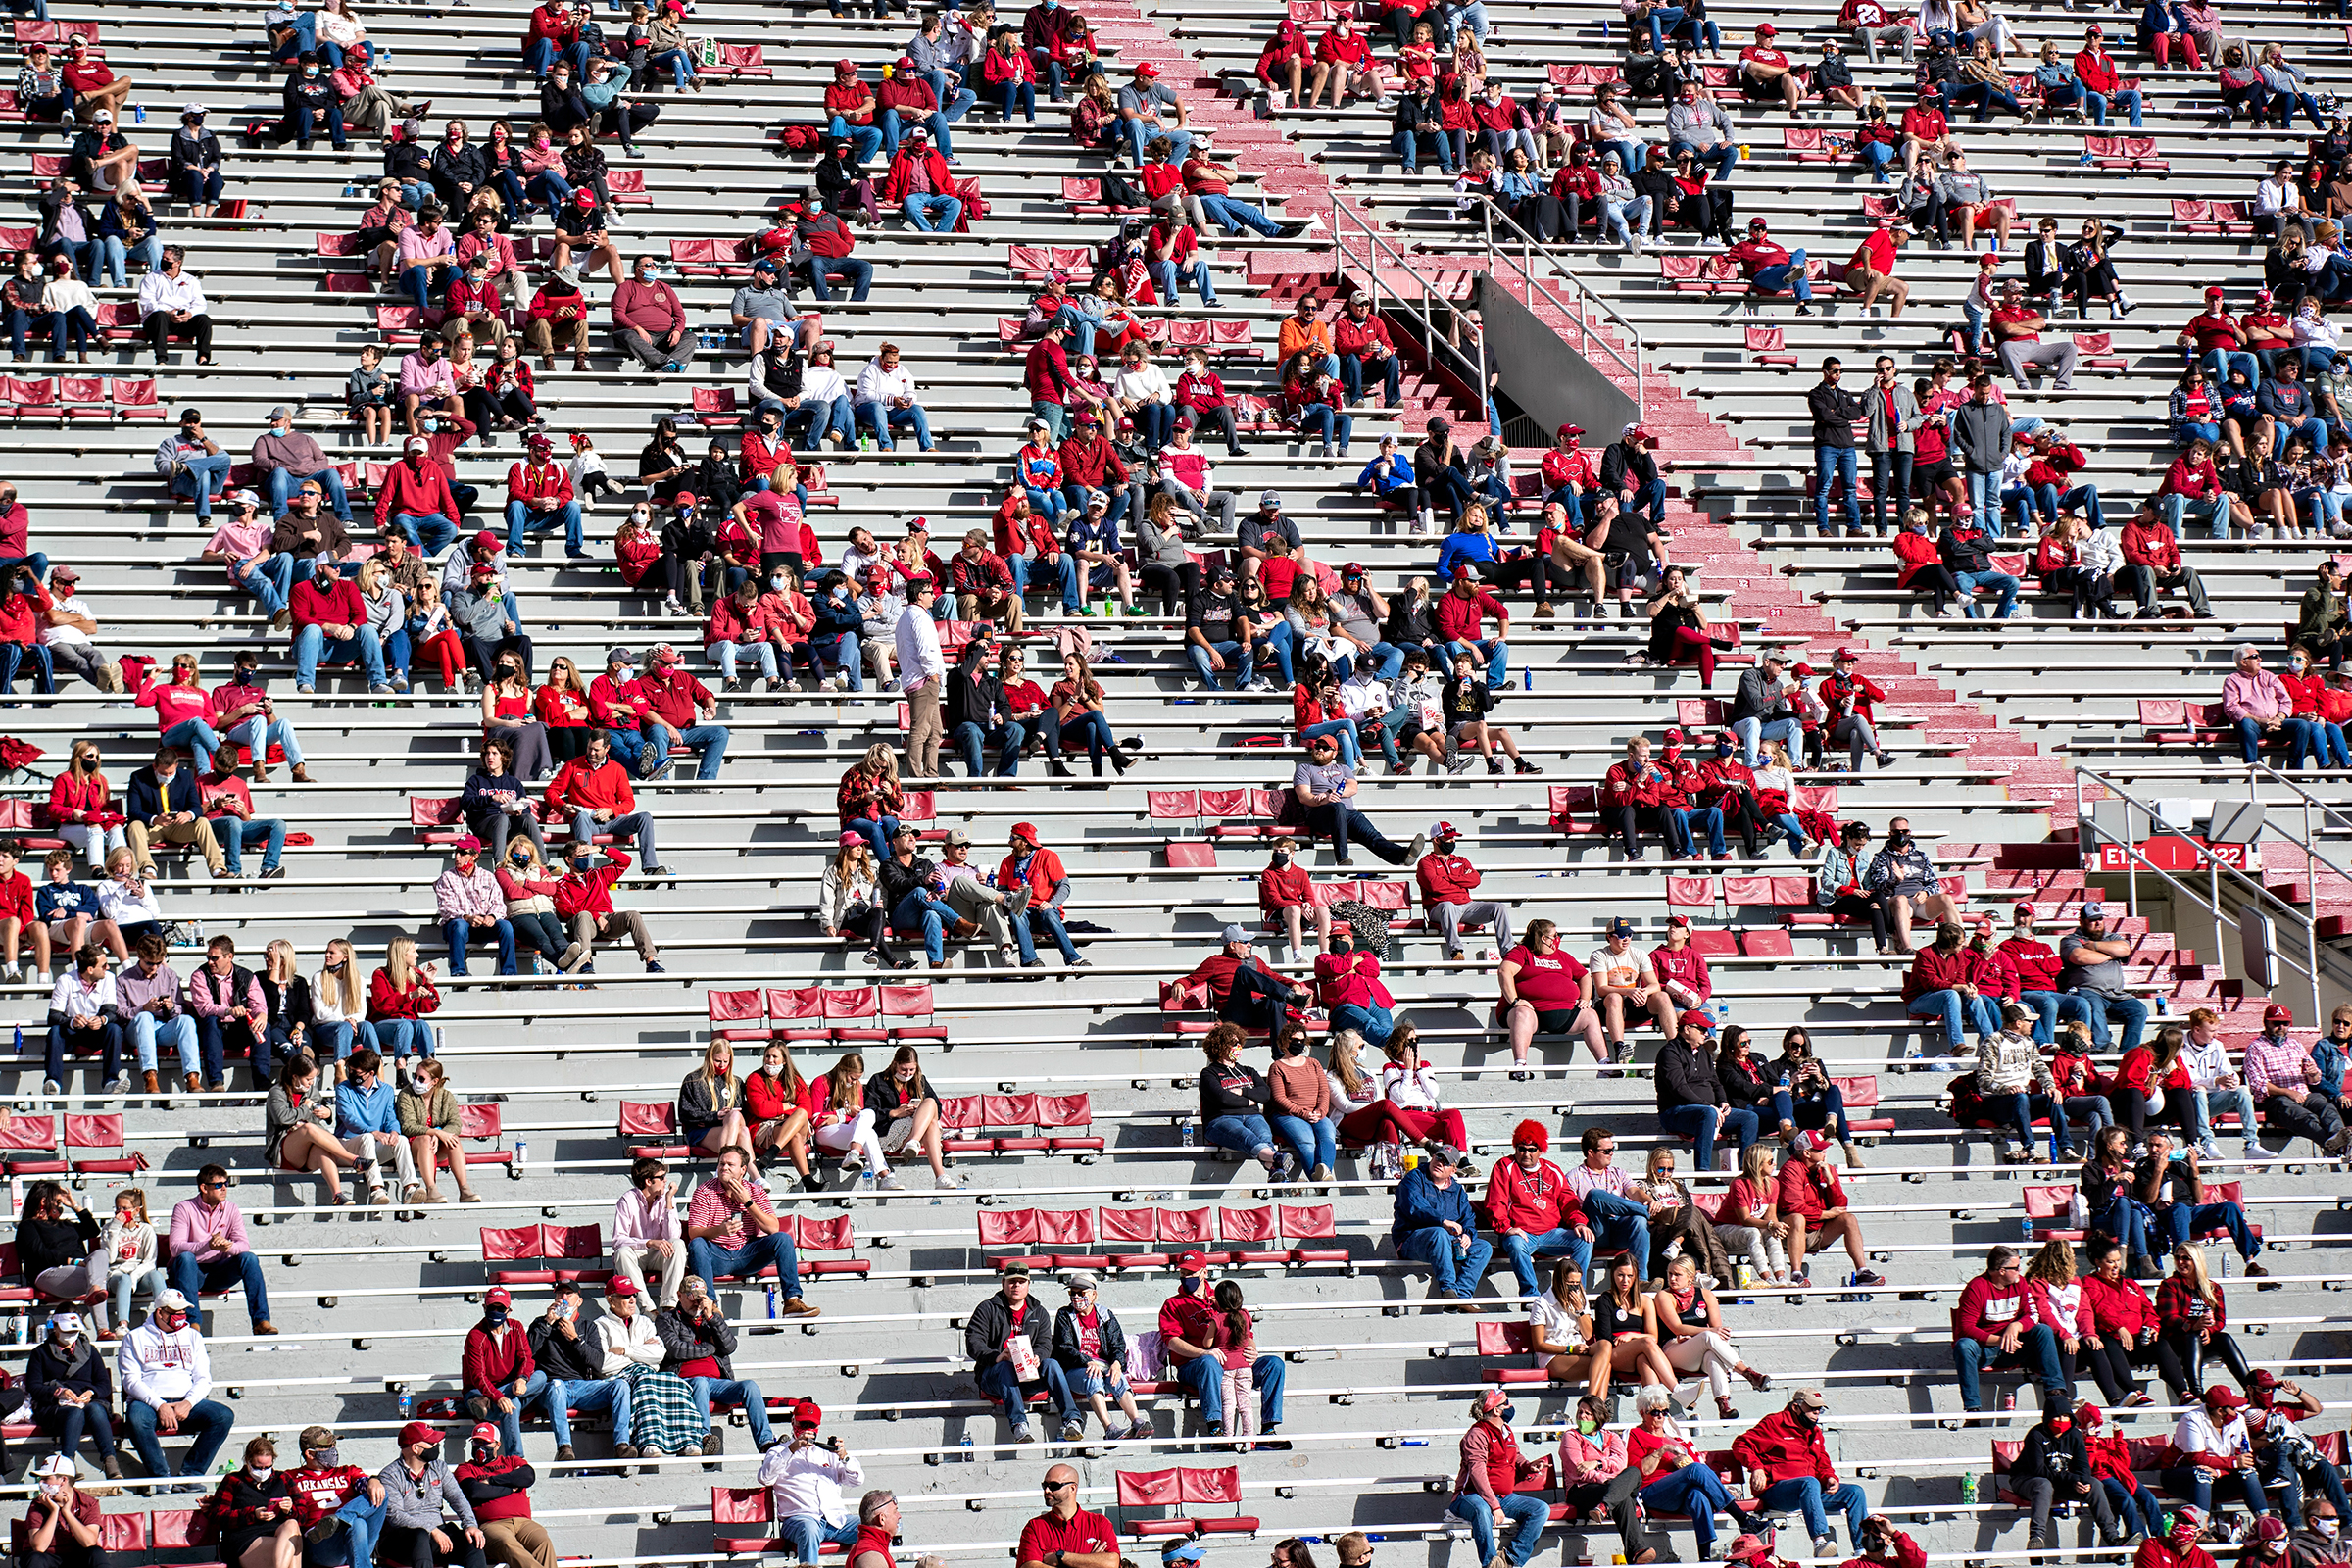 Socially distanced groups of fans during a game between the Arkansas Razorbacks and the Mississippi Rebels in Fayetteville, Ark., on Oct. 17, 2020. (Wesley Hitt—Getty Images)